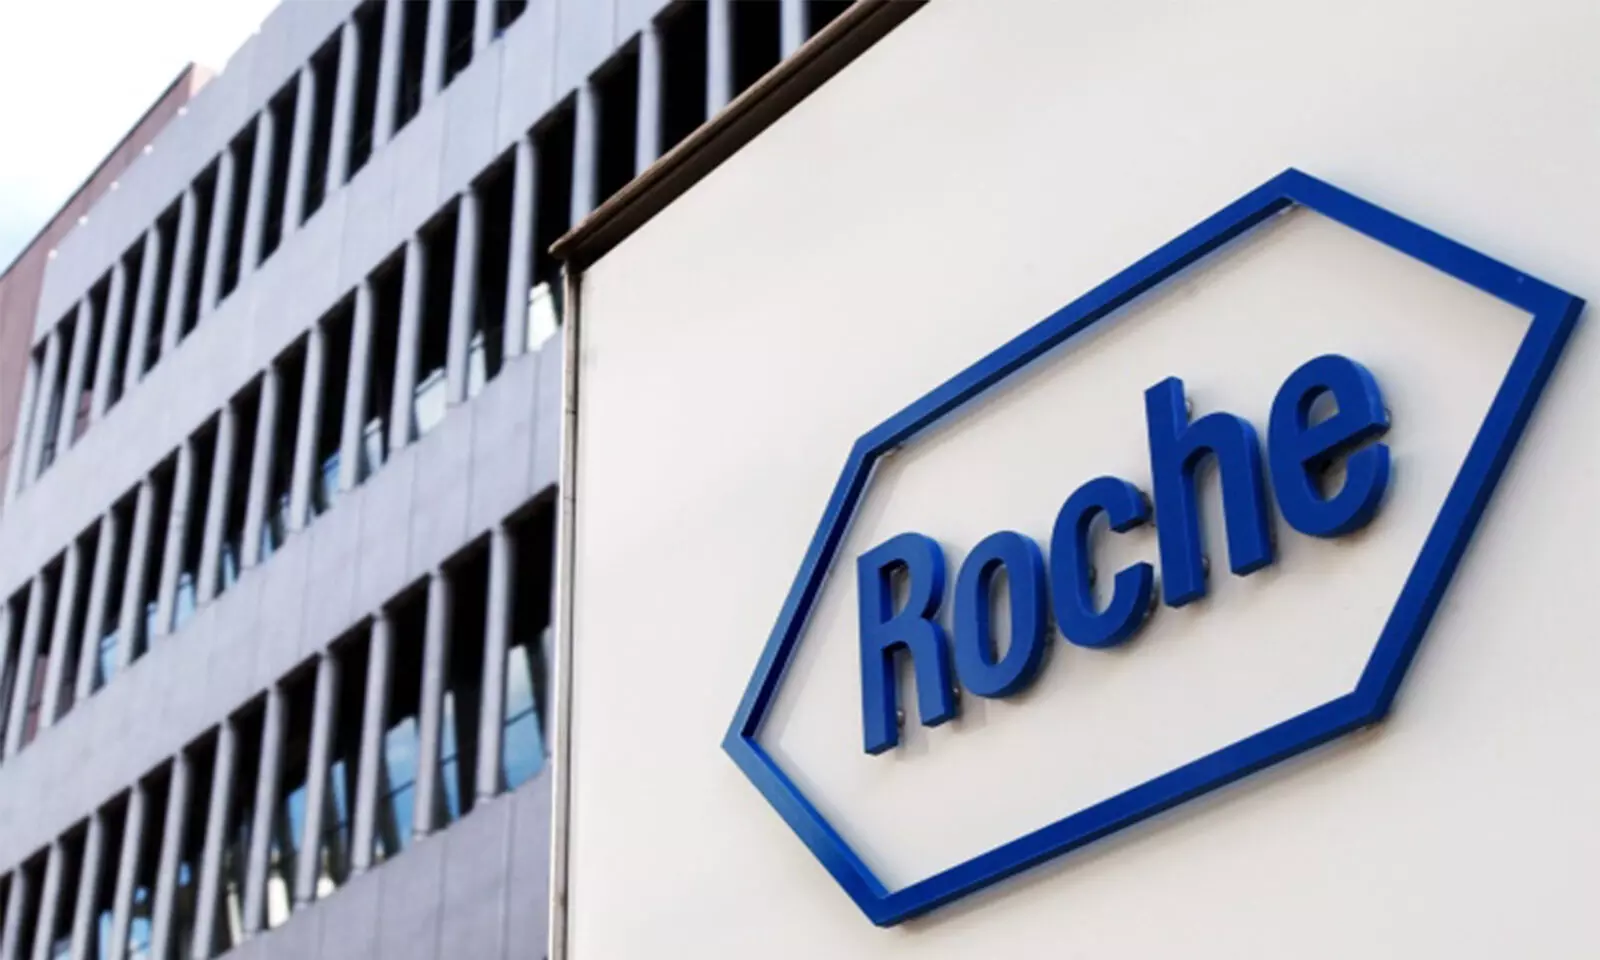 Alzheimers drug price will be competitive: Roche executive